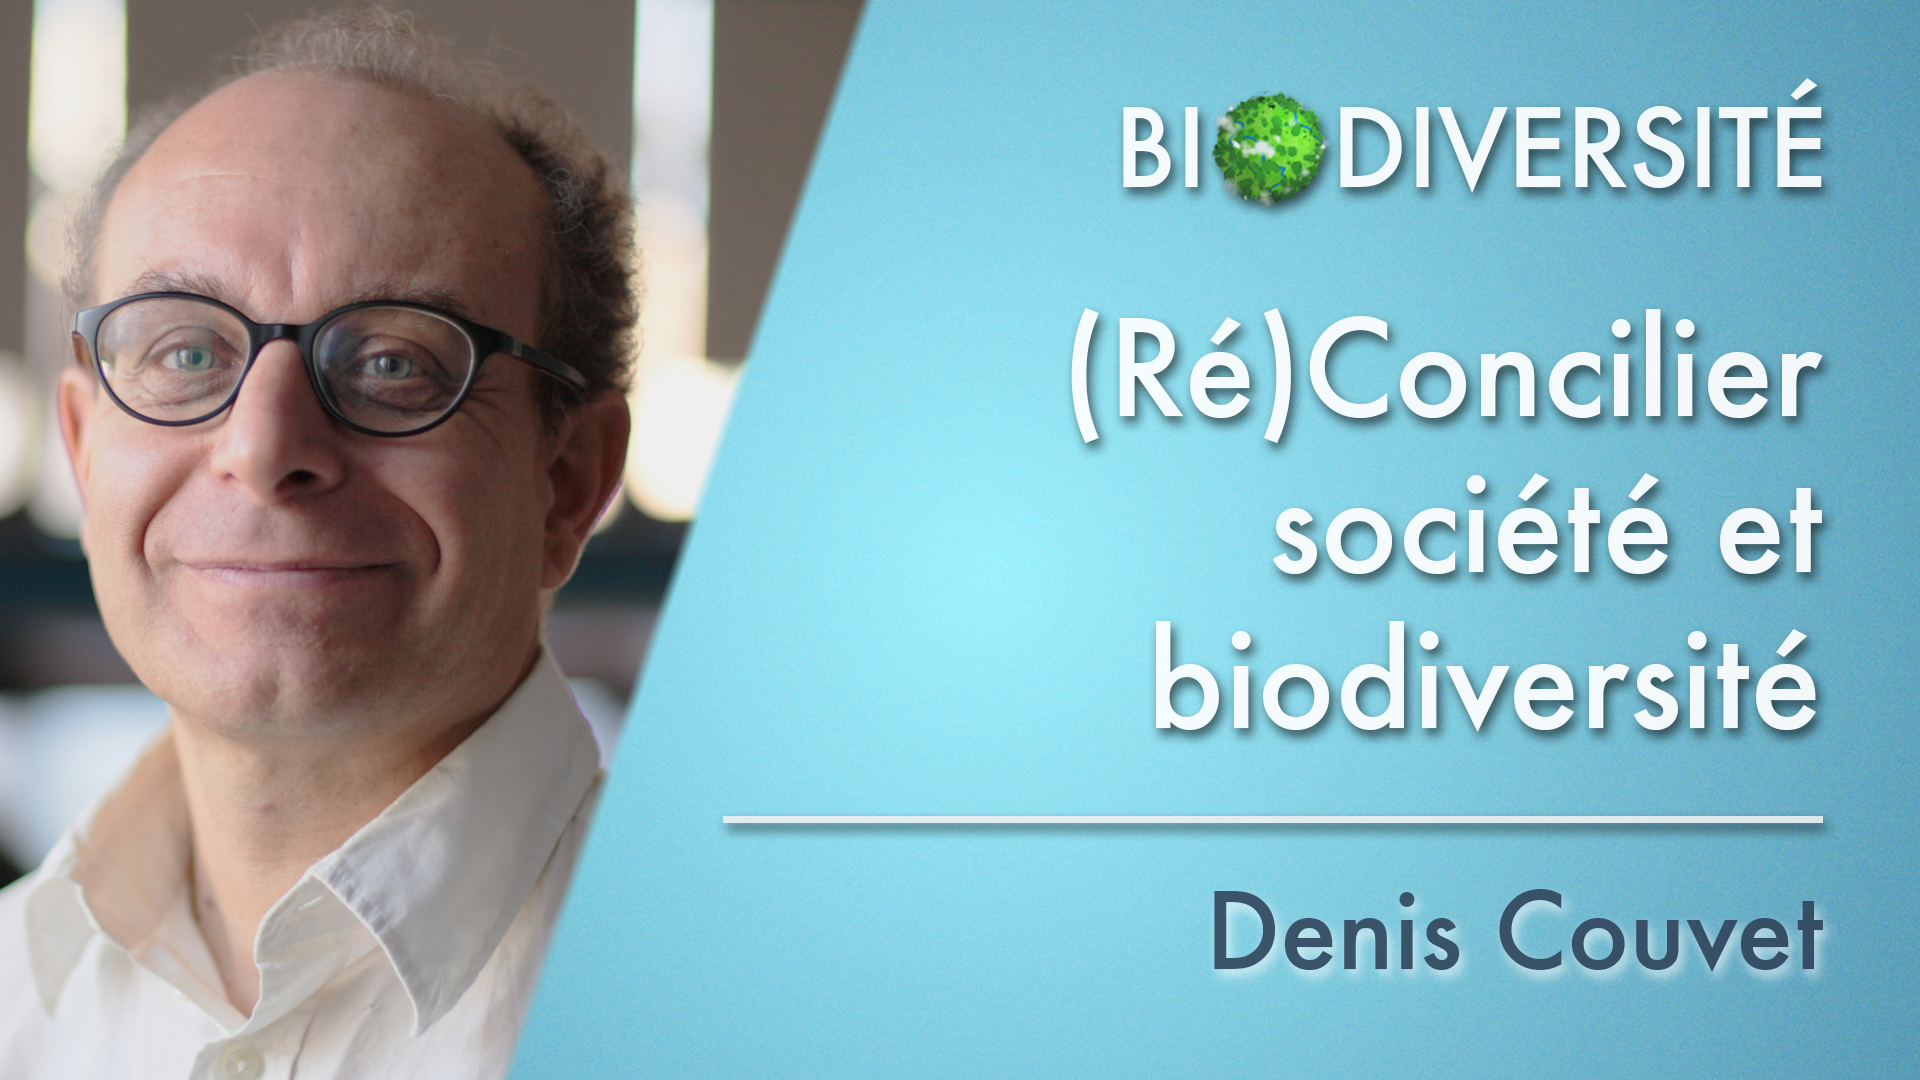 EN-8. How can society and biodiversity be reconcilied